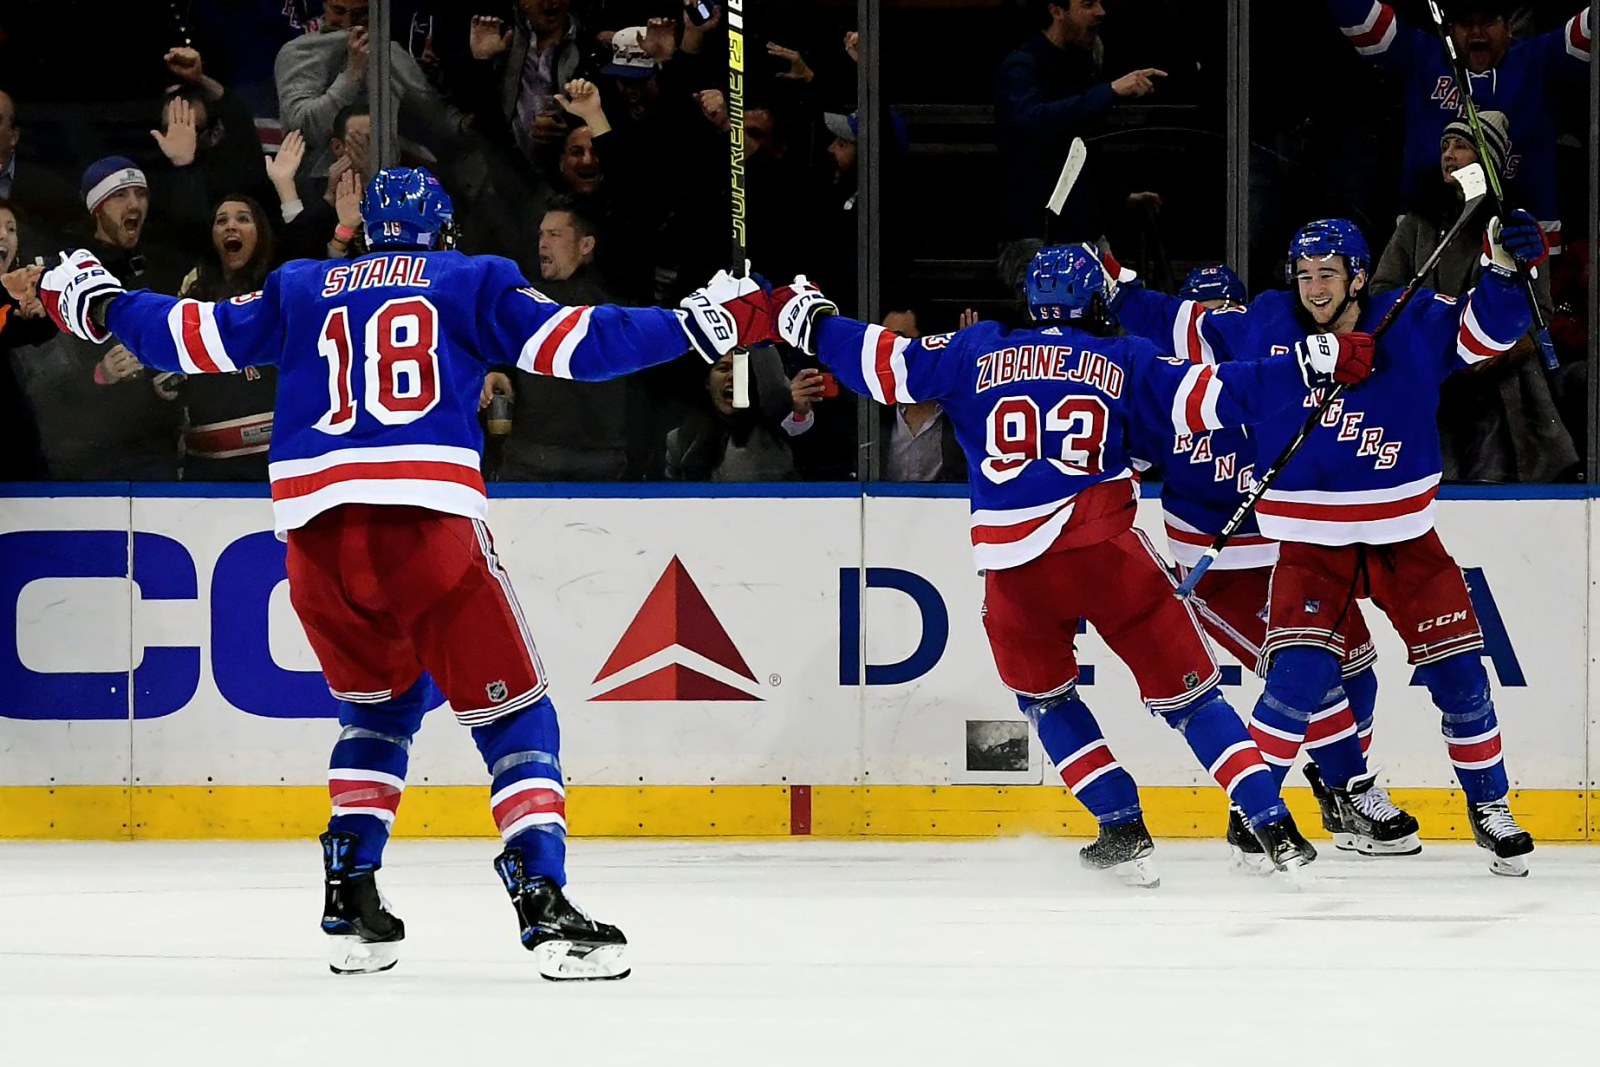 New York Rangers: For all of their warts, the team is still fun